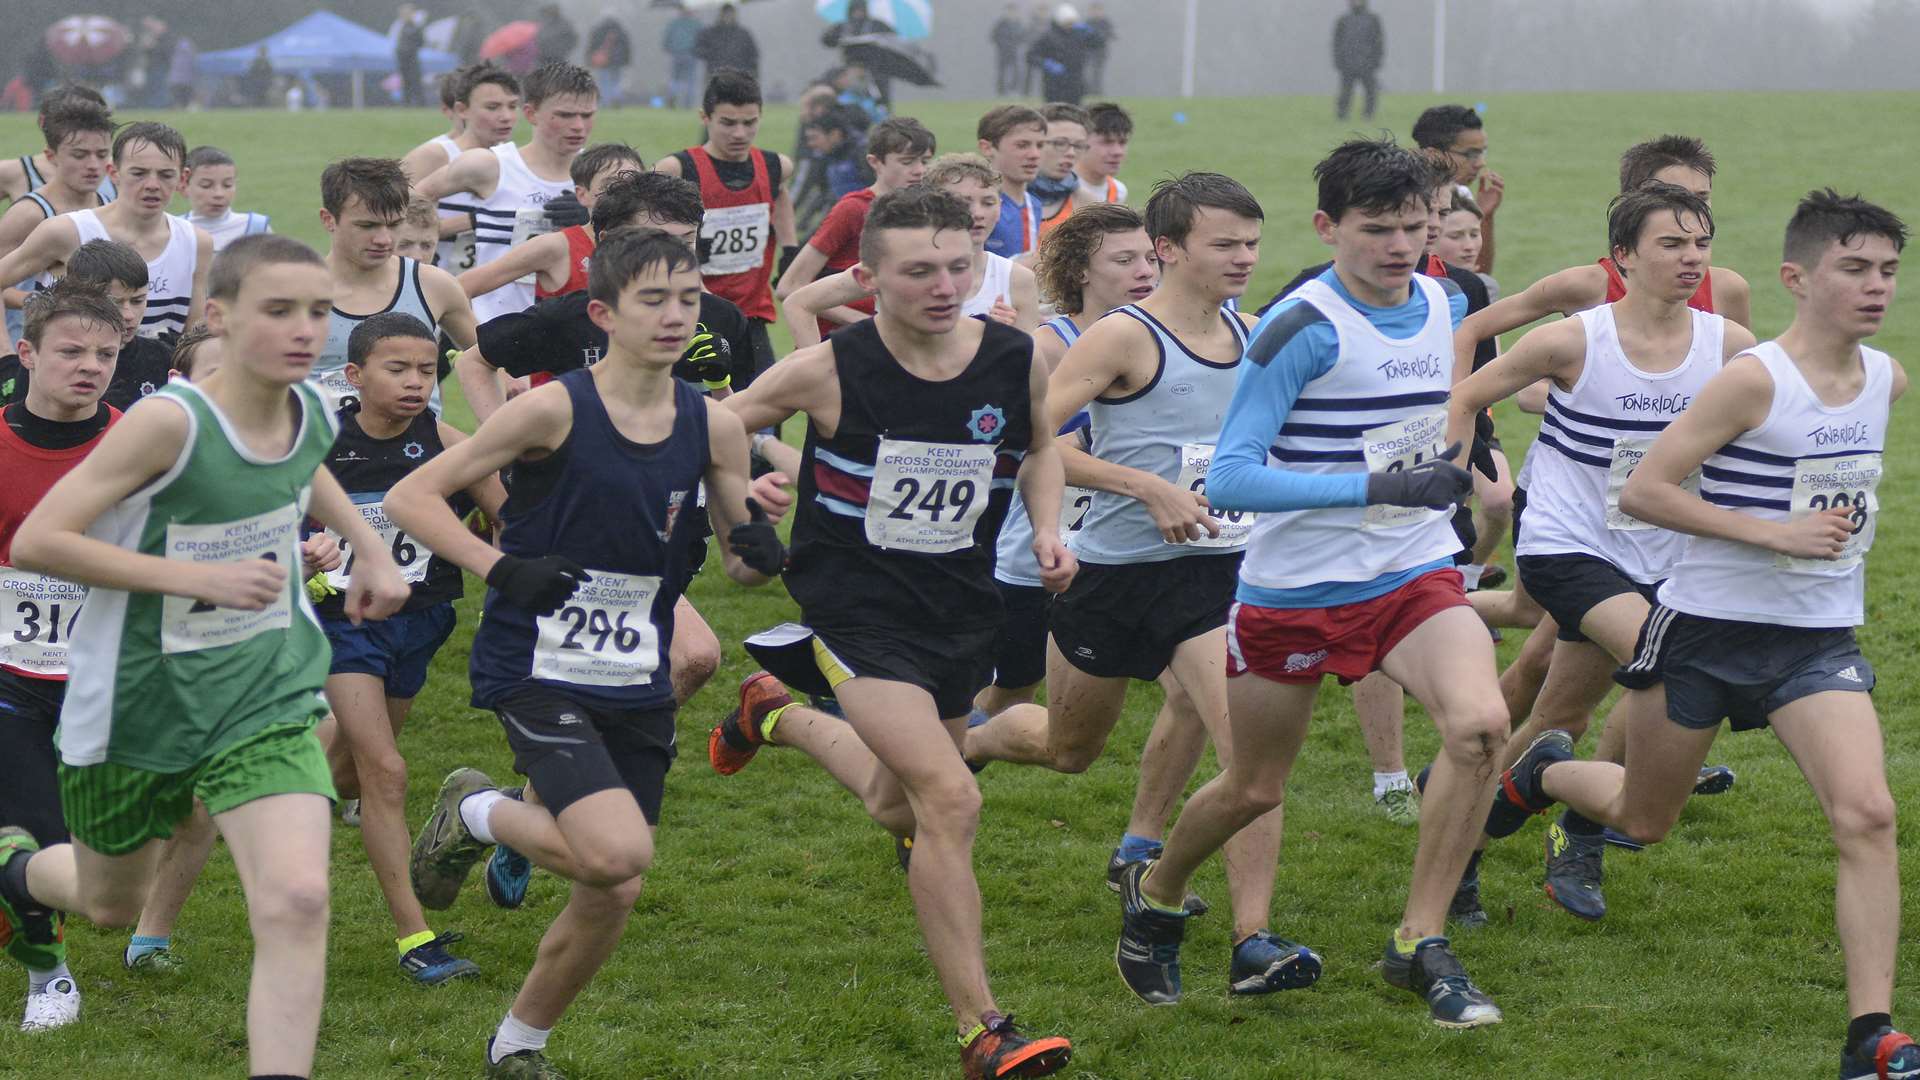 The start of the boys' under-15 race at the Kent Cross-Country Championships Picture: Paul Amos